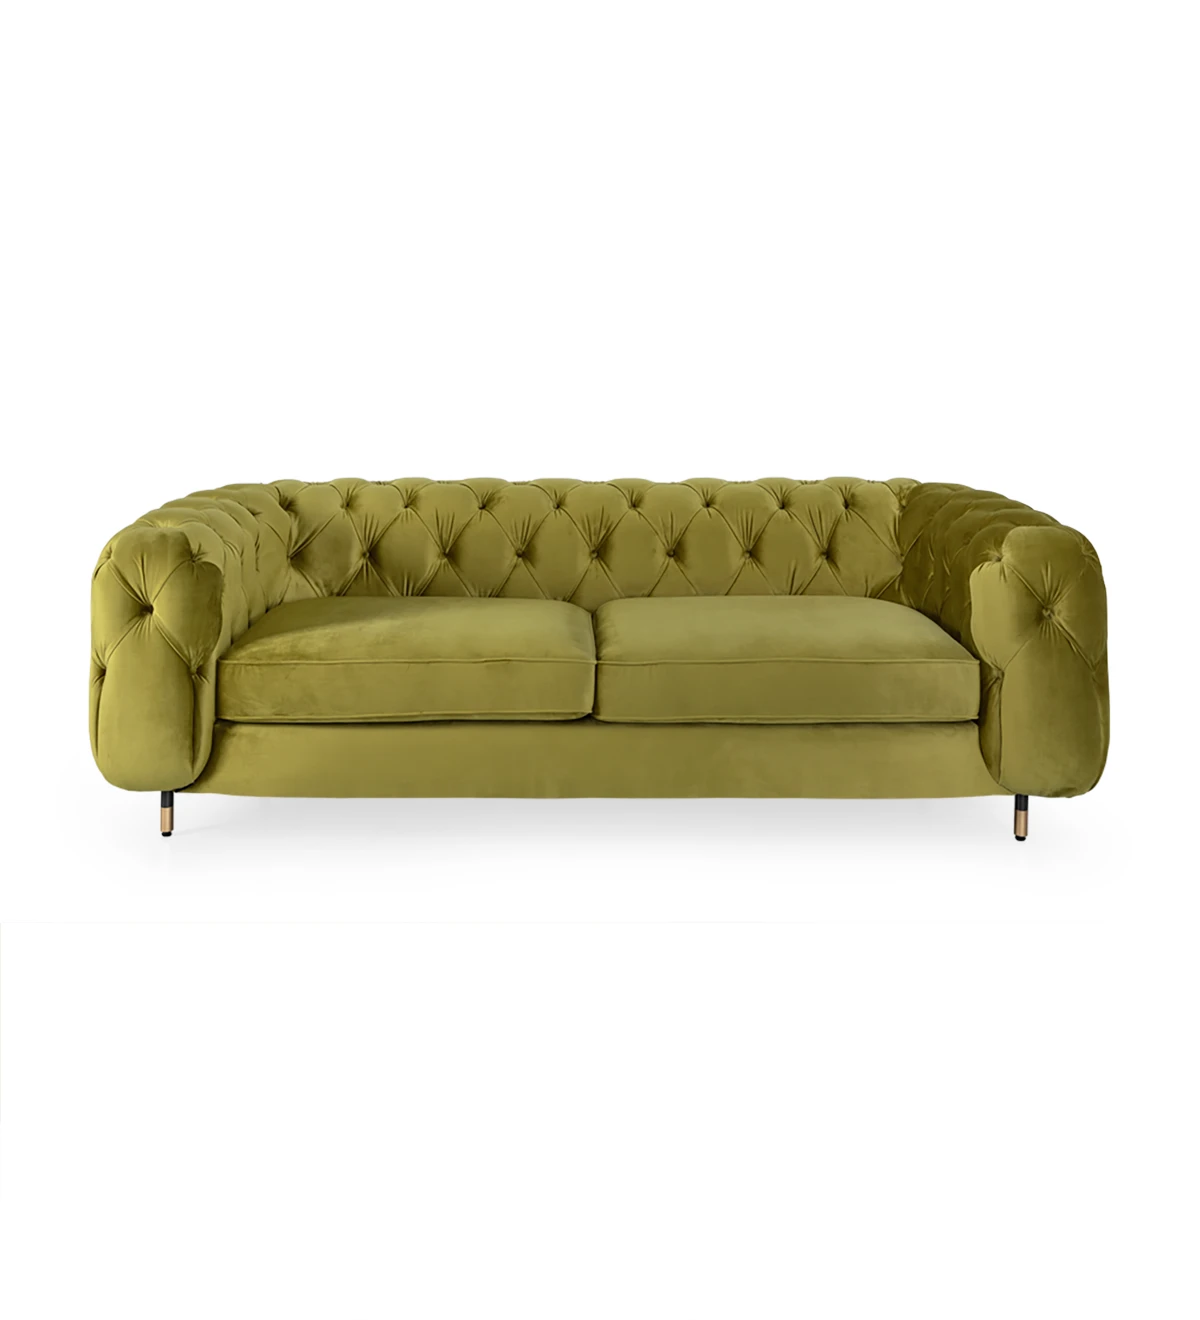 3 seater sofa upholstered in fabric, with metallic feet lacquered in black with golden detail.